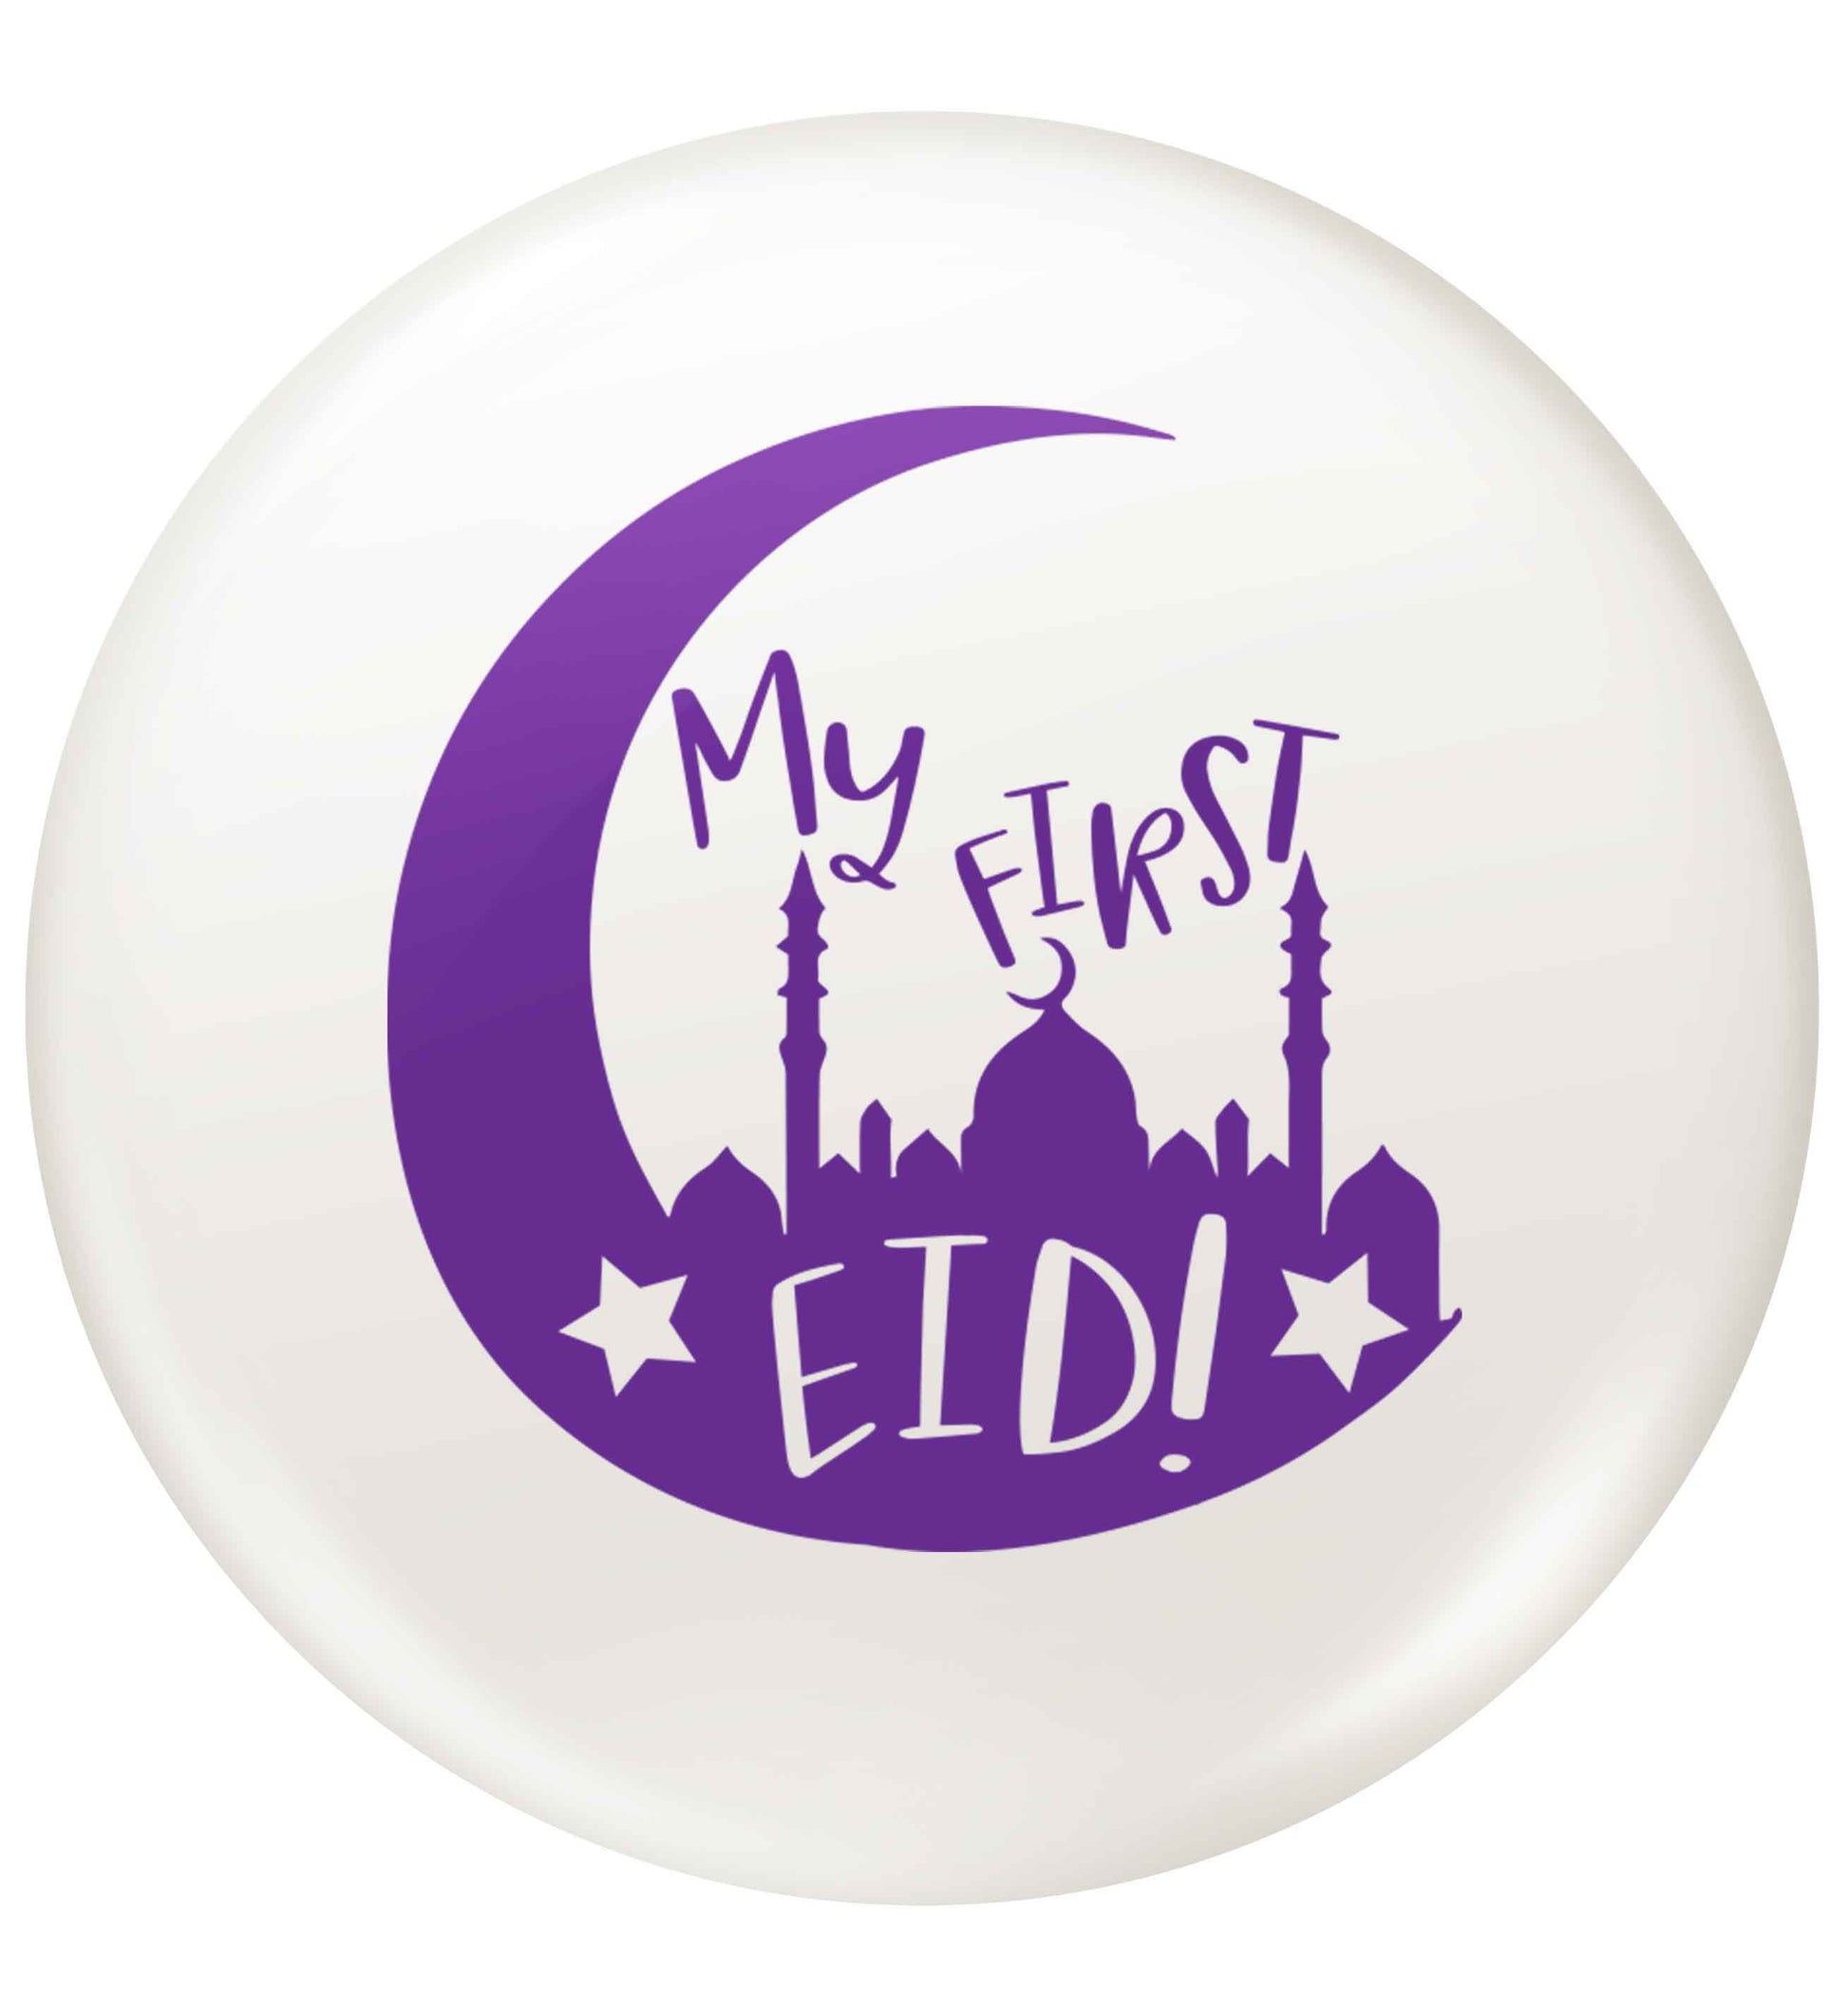 It's my first Eid moon small 25mm Pin badge